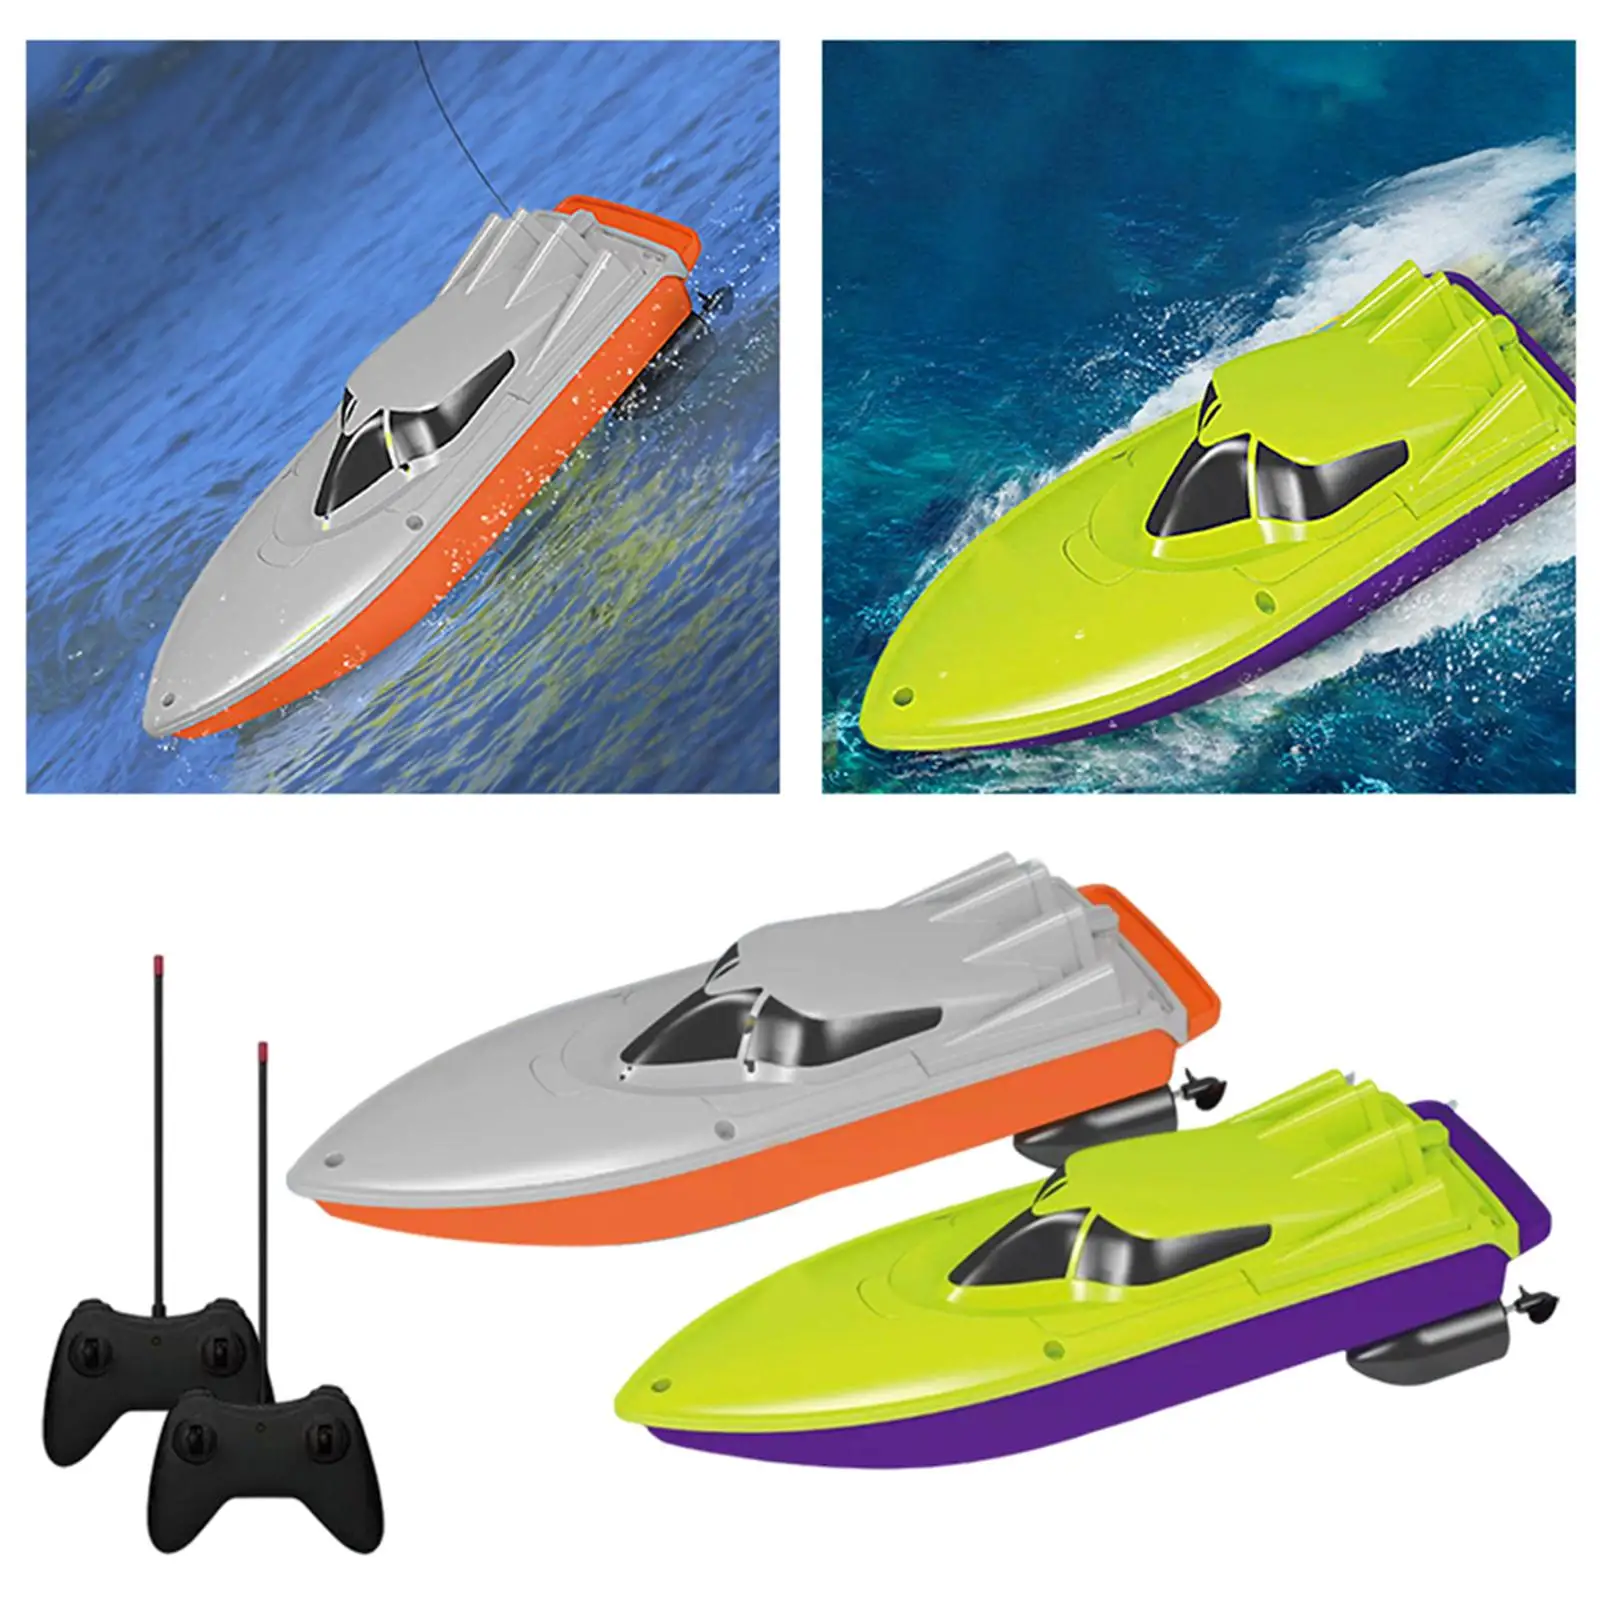 Remote Control Boat Electric Ship Yacht Toys High Powerful for River, Pools, Lakes,